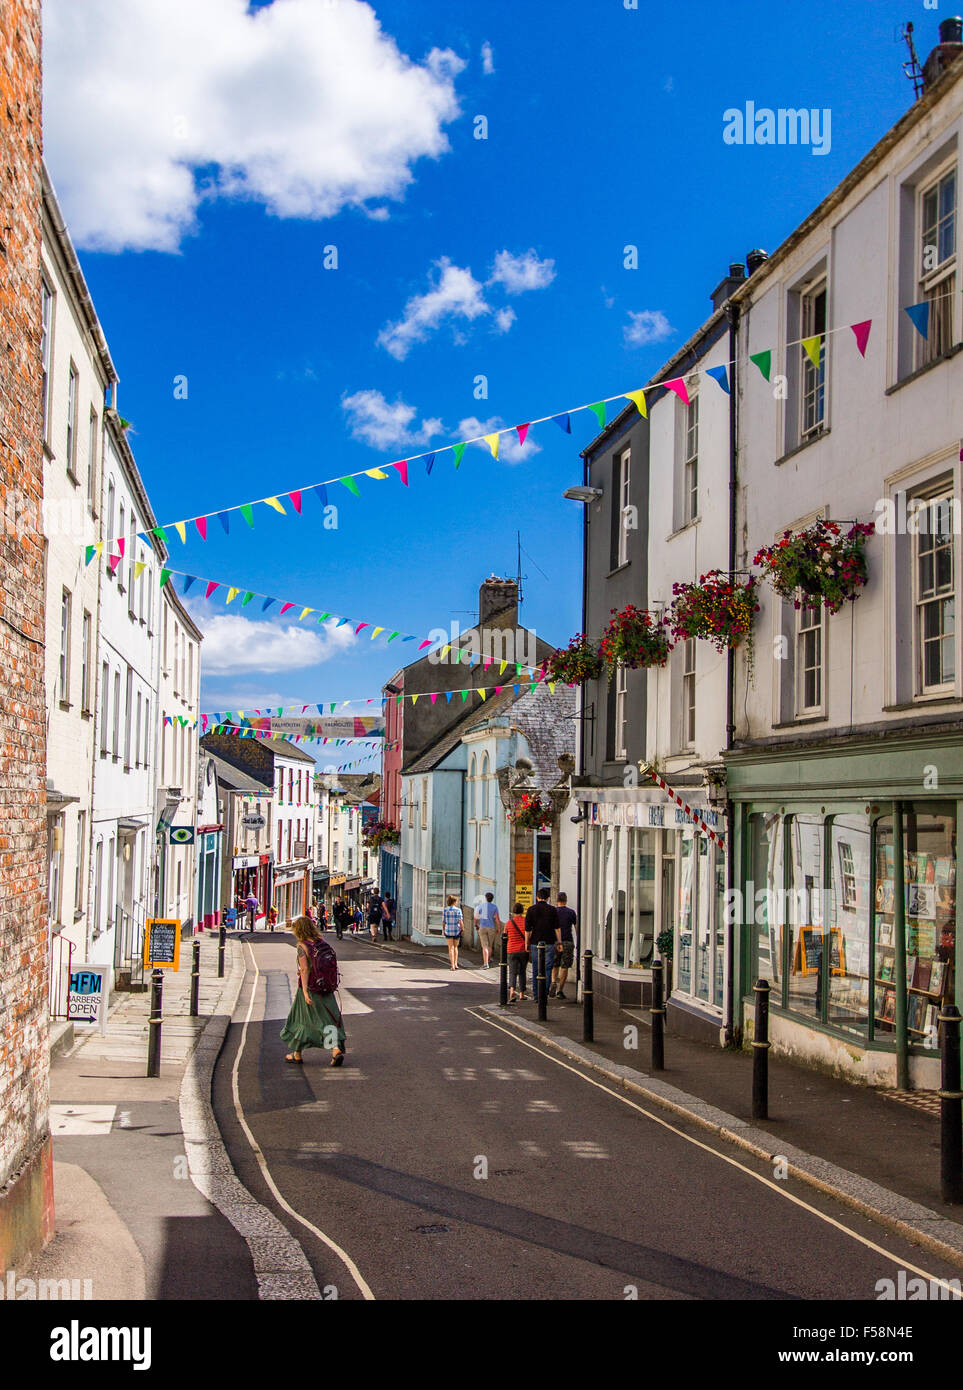 The High Street in Falmouth during the summer decorated with colourful bunting and flower baskets, Cornwall, UK. Stock Photo